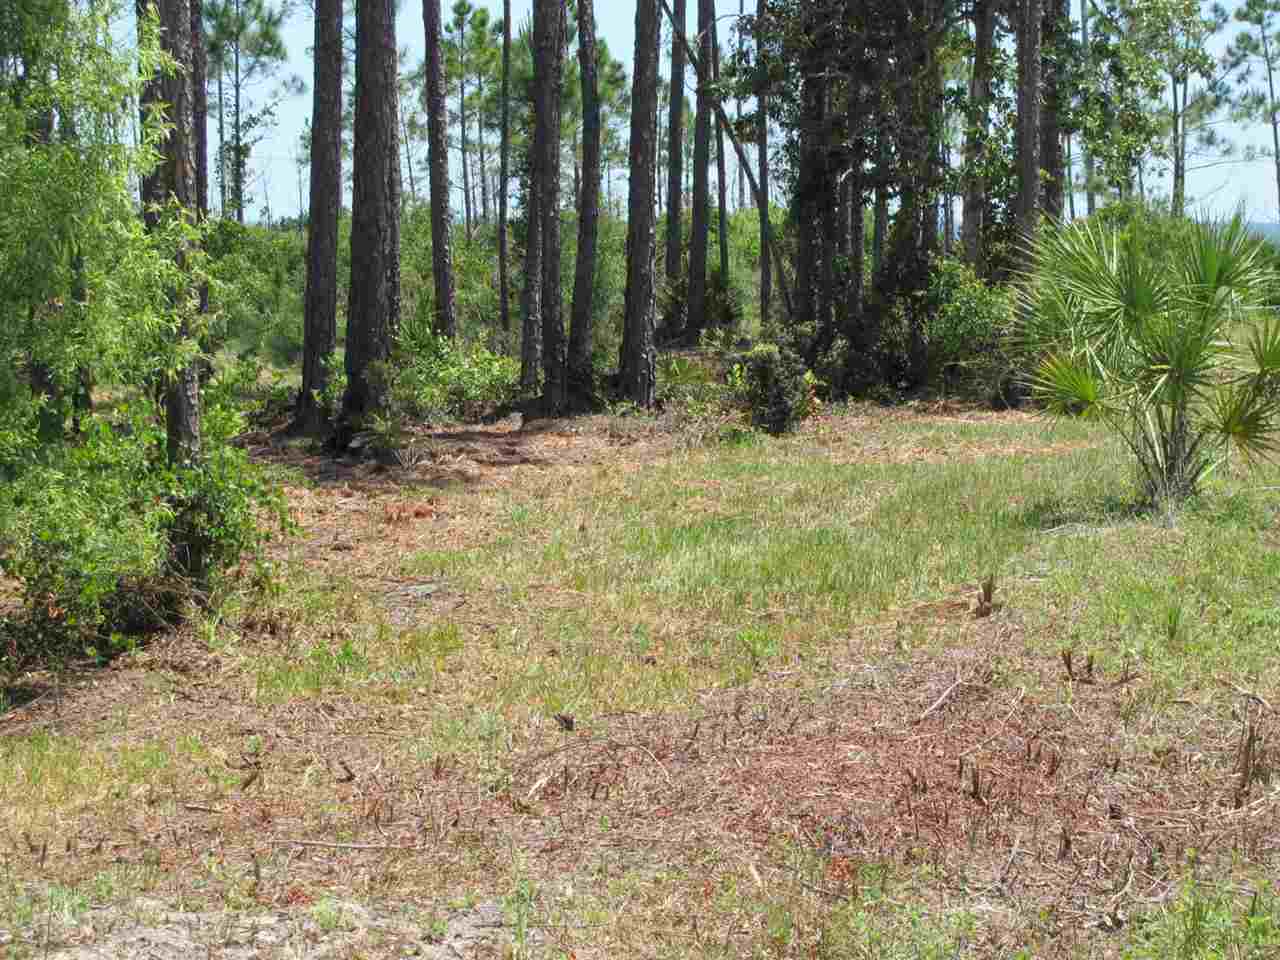 1501 Highway 98,CARRABELLE,Florida 32322,Lots and land,Highway 98,1,364085